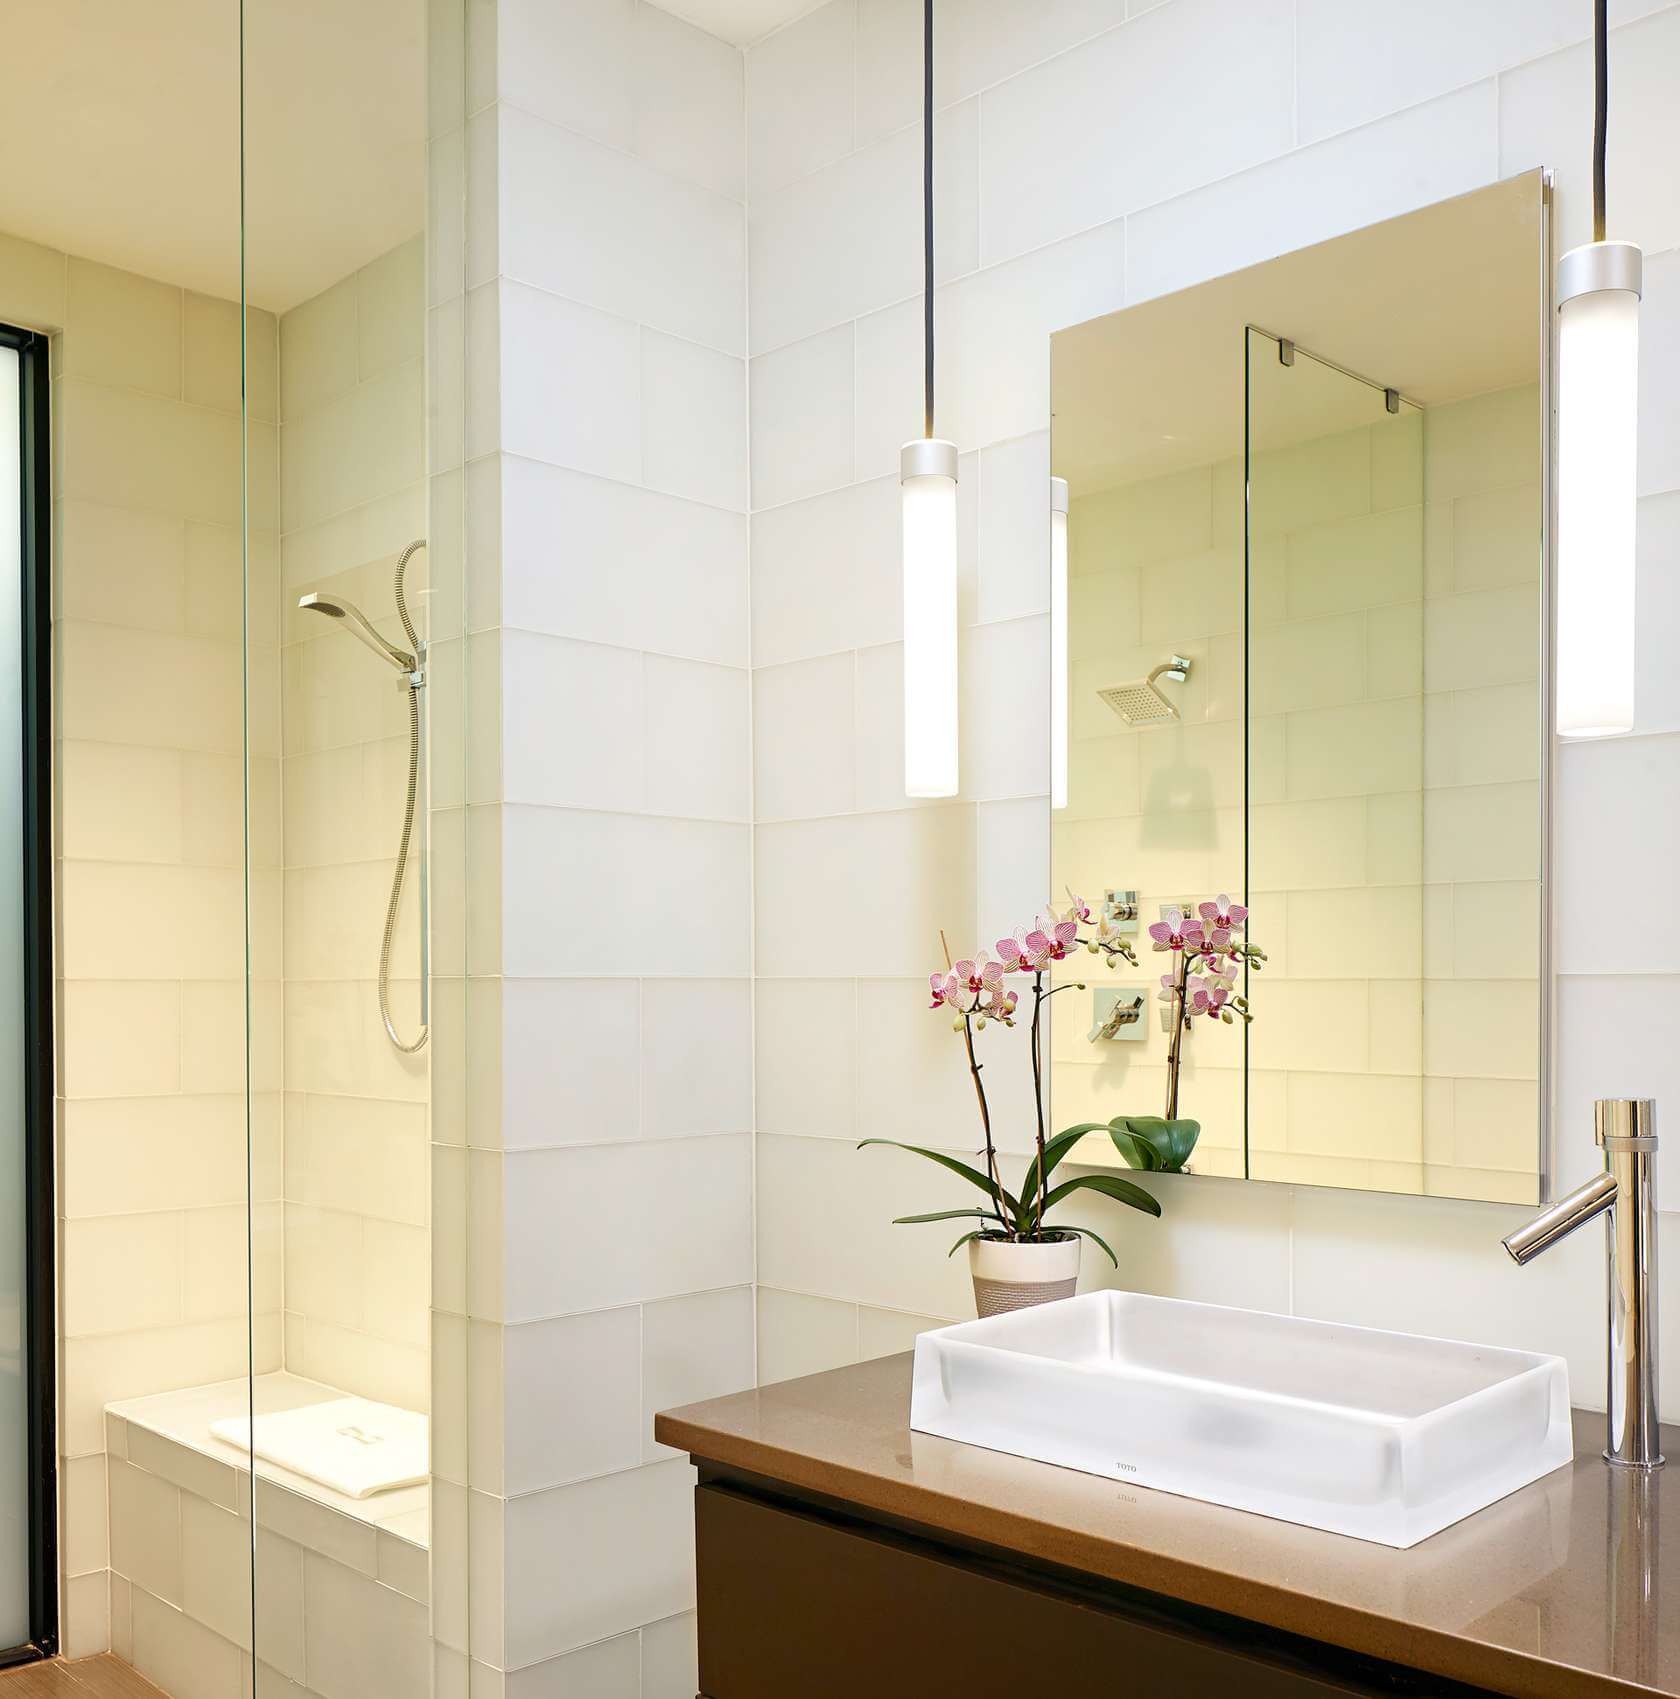 Use Lighting to Increase Space in a Small Bathroom | Easy Ways to Make a Small Bathroom Look Larger | FarmFoodFamily.com